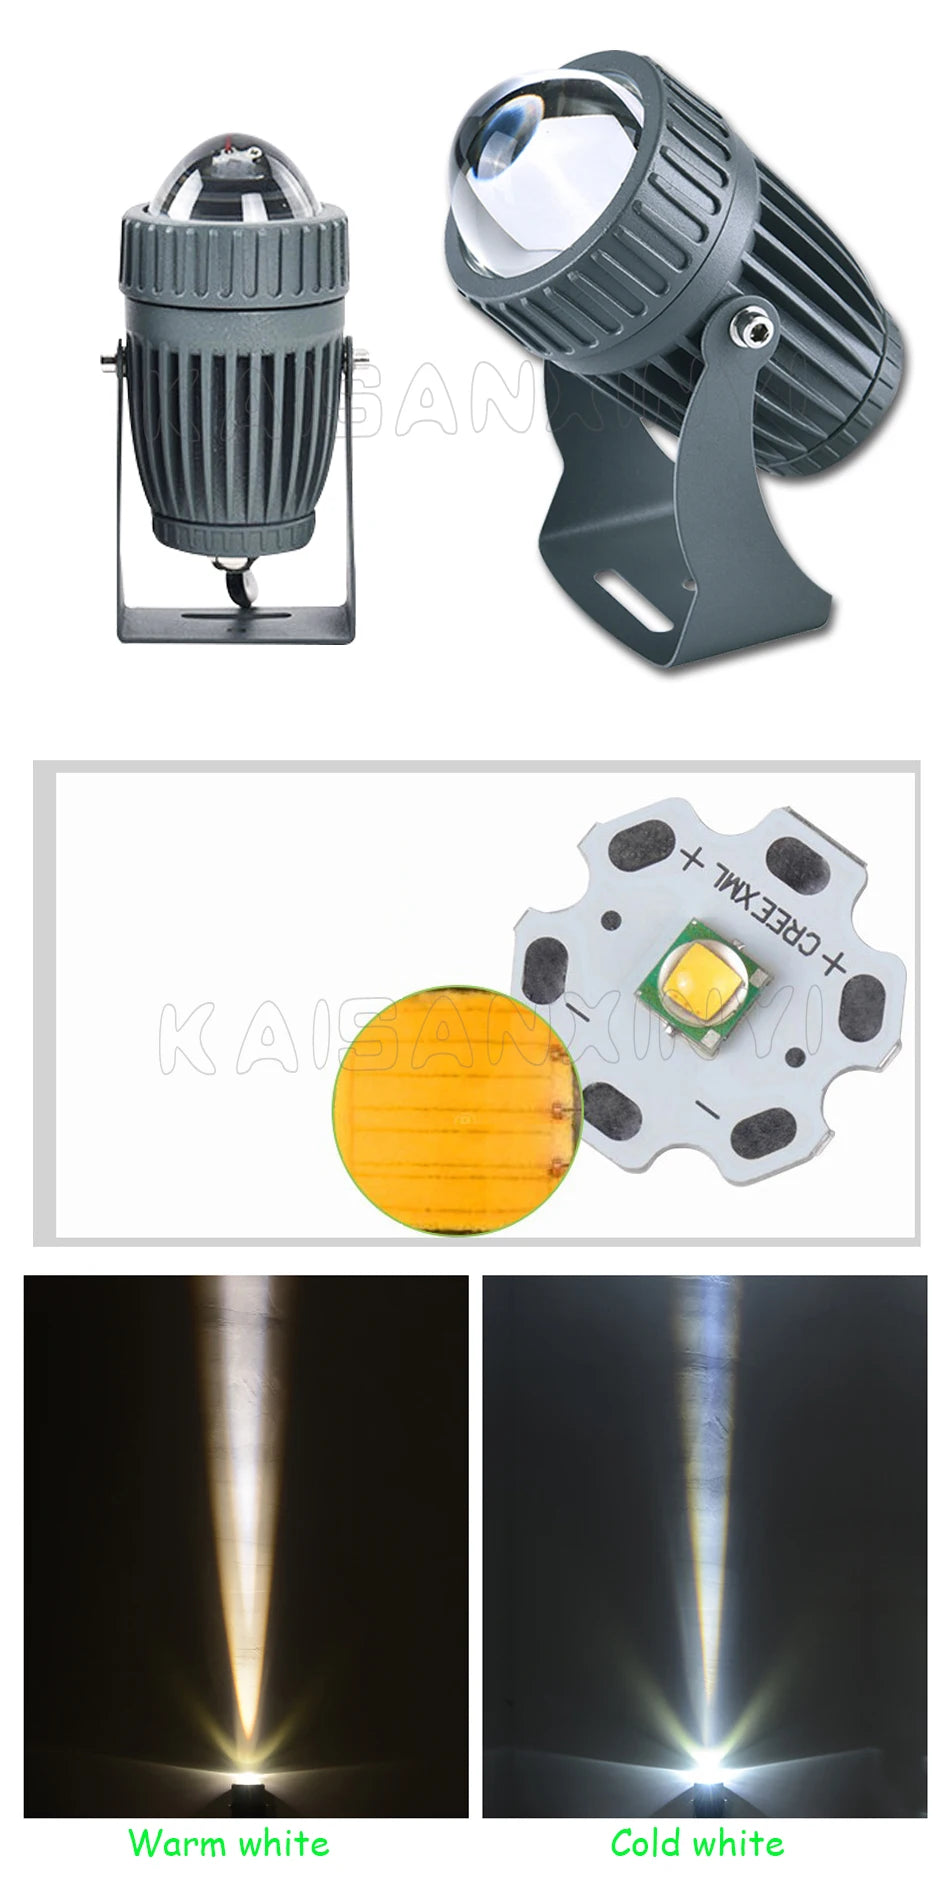 LED Lawn Light, Outdoor LED floodlight with IP65 protection, modern style and adjustable voltage.